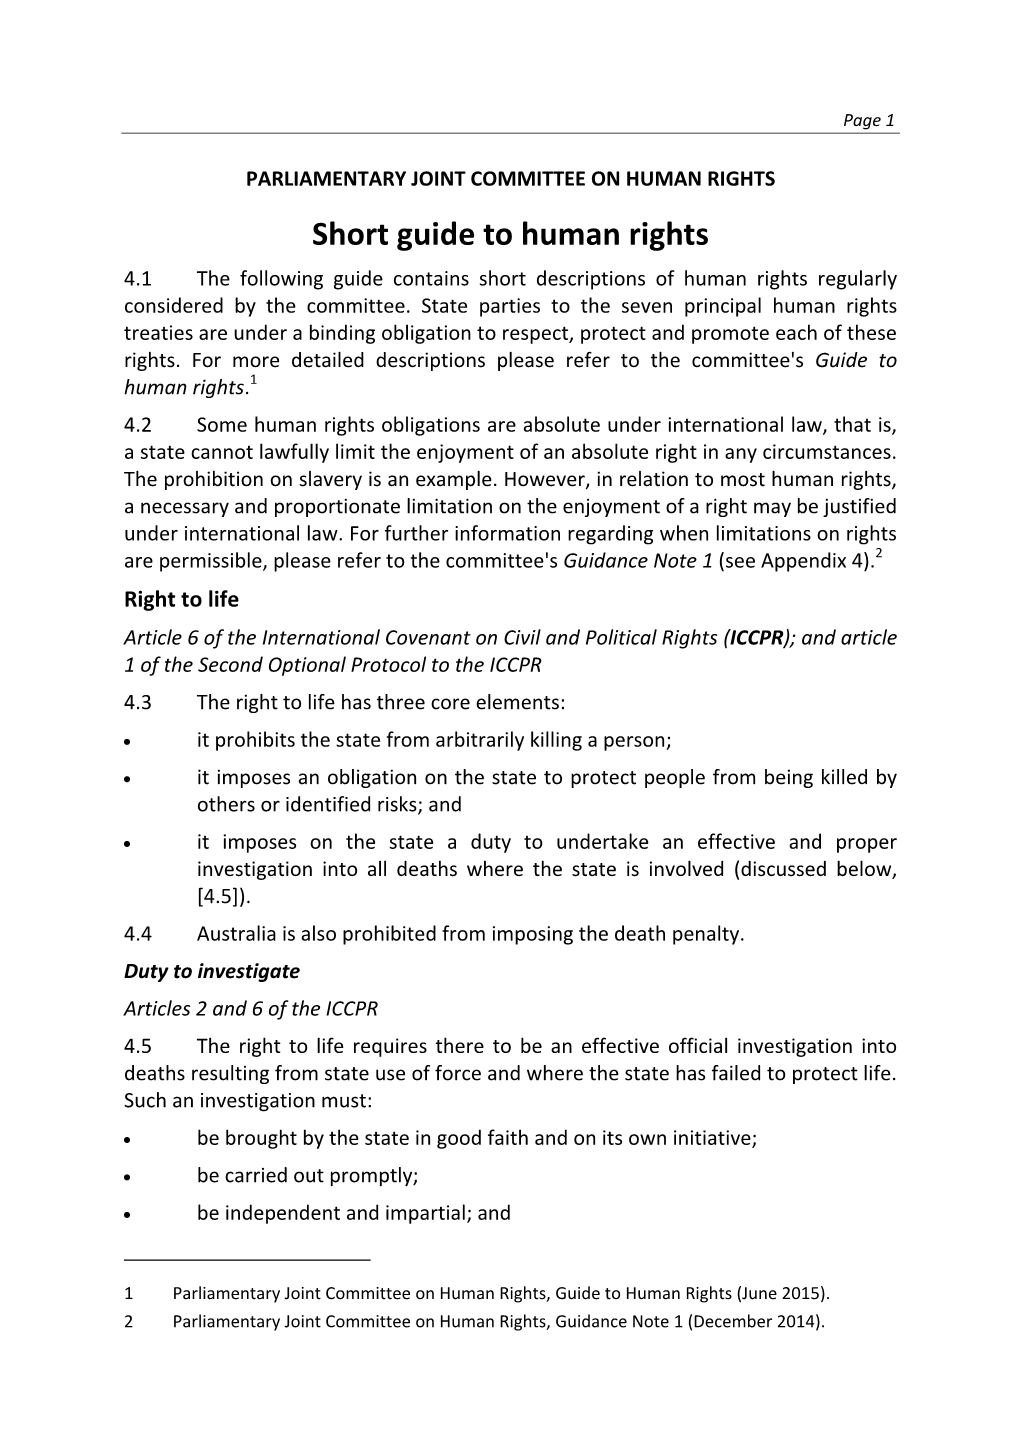 Short Guide to Human Rights 4.1 the Following Guide Contains Short Descriptions of Human Rights Regularly Considered by the Committee